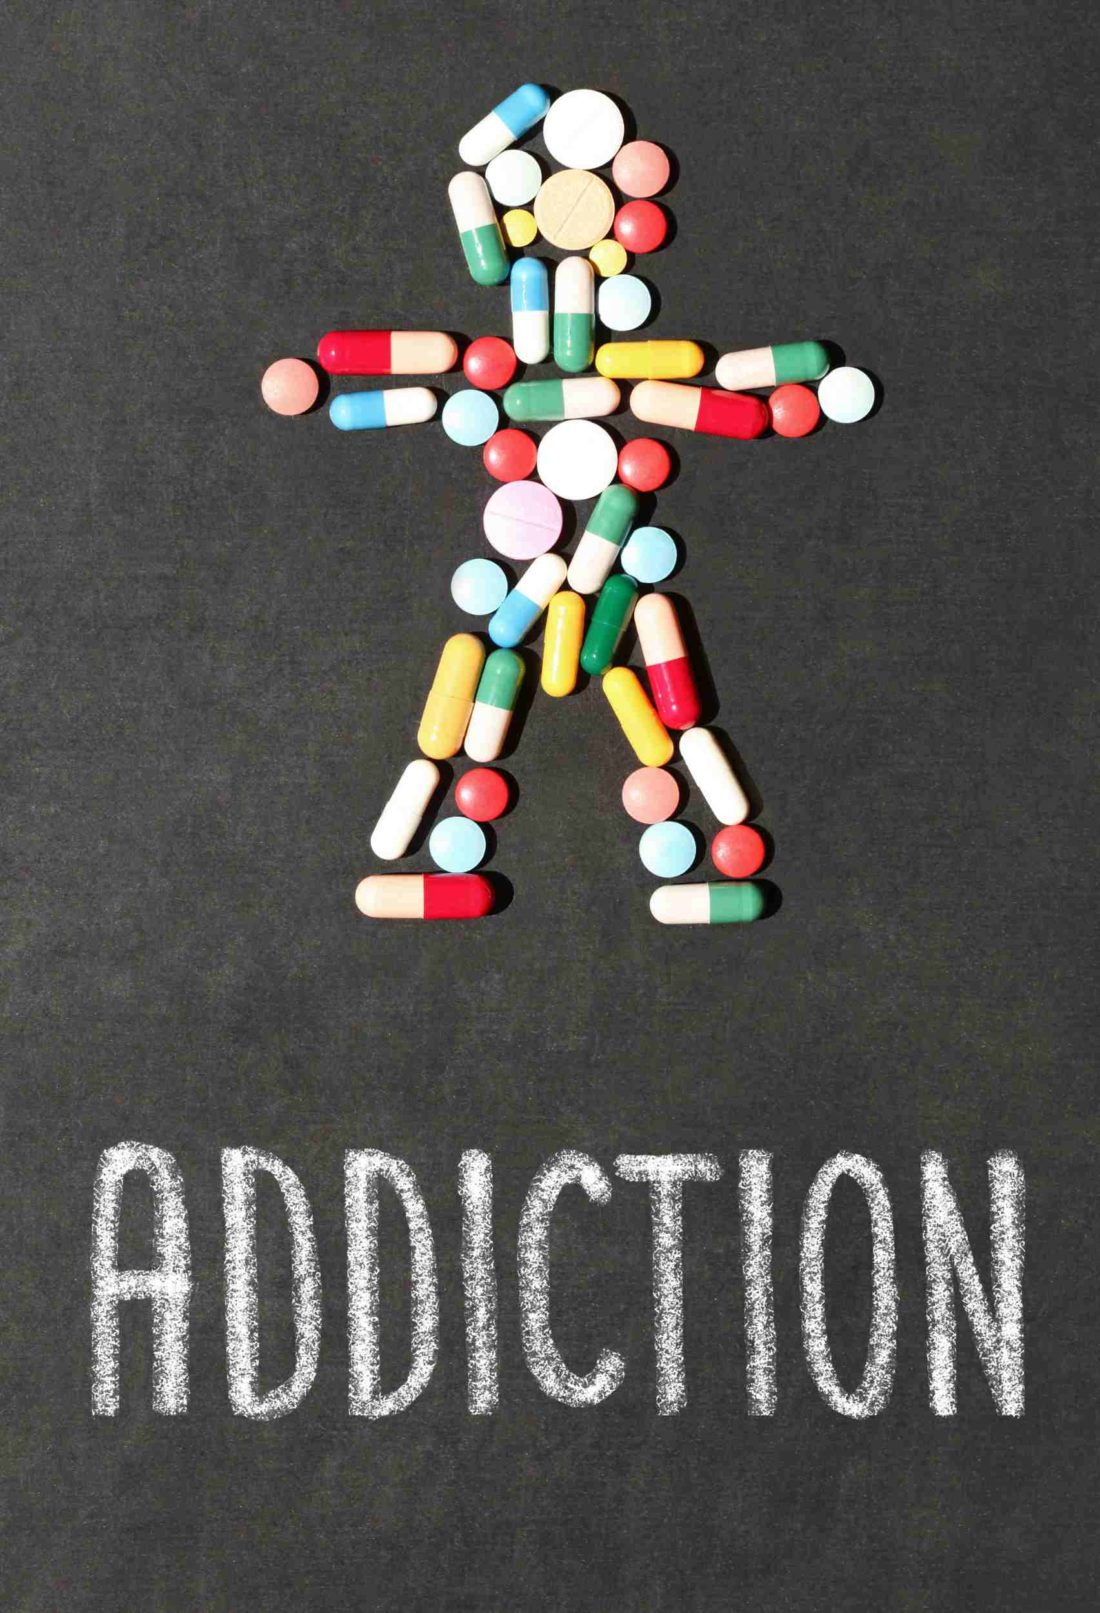 How Quickly Will Drugs Lead to an Addiction?